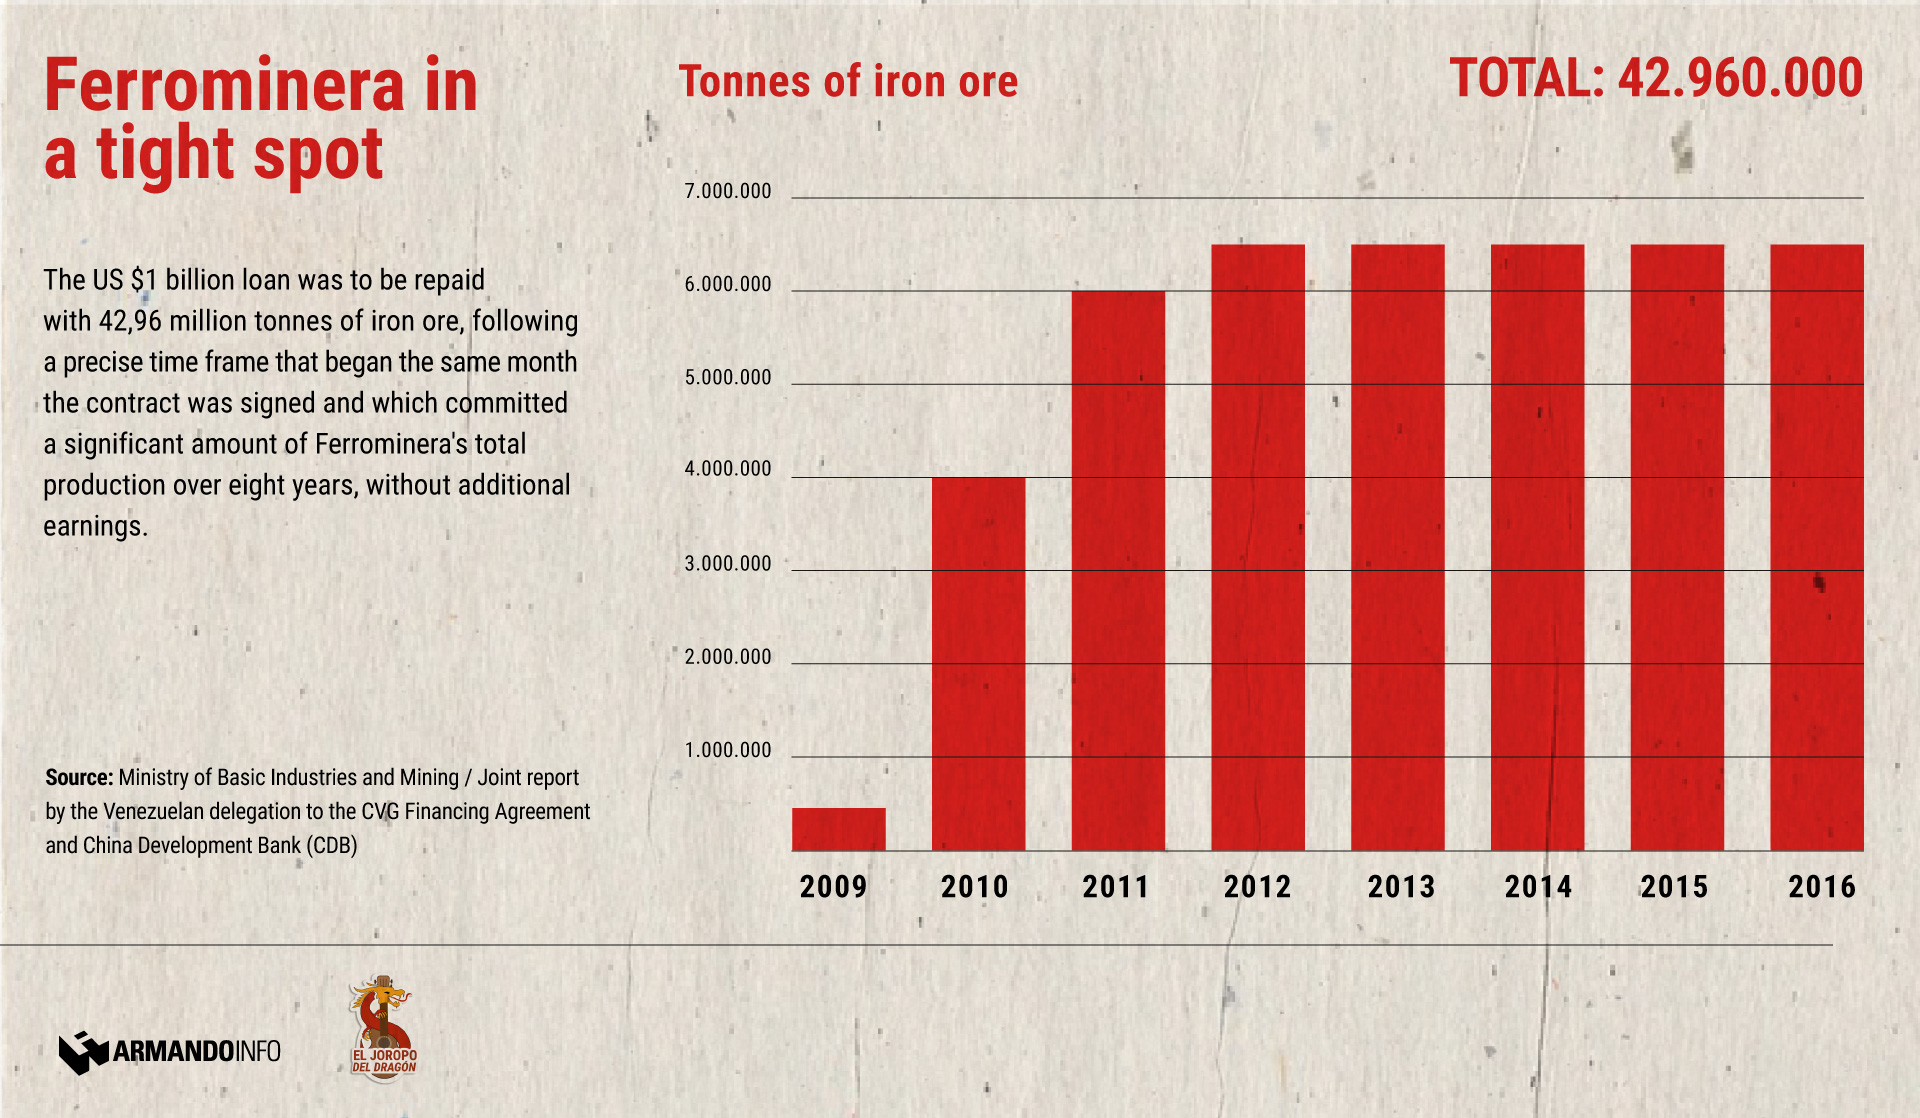 graphic showing tonnes of iron ore